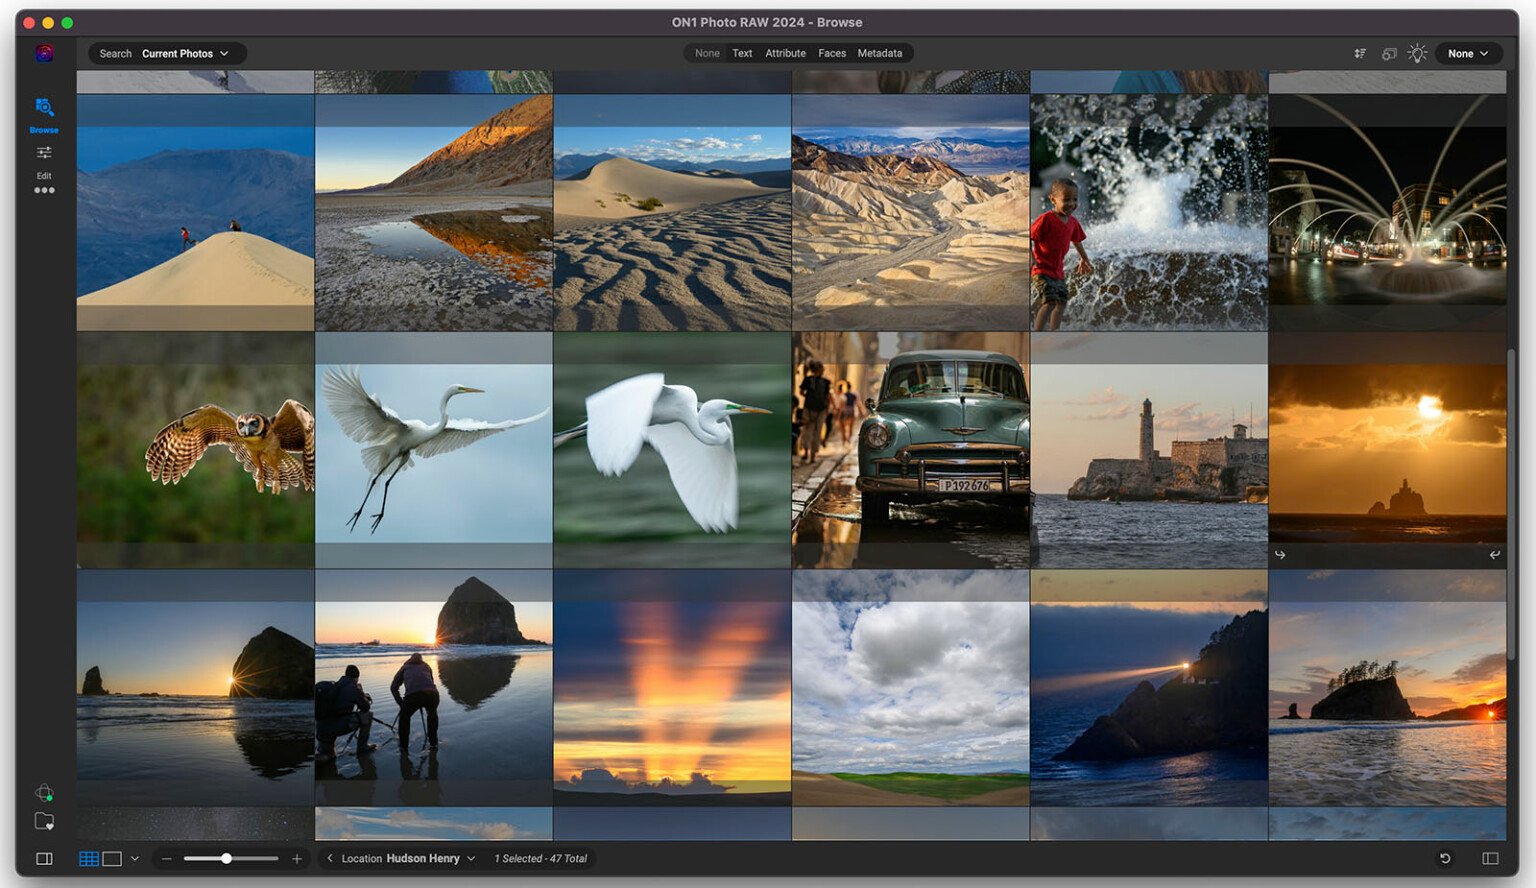 ON1 Photo RAW 2024 v18.0.4.14762 (x64) Multilingual On1-photo-raw-2024-browse-1536x888